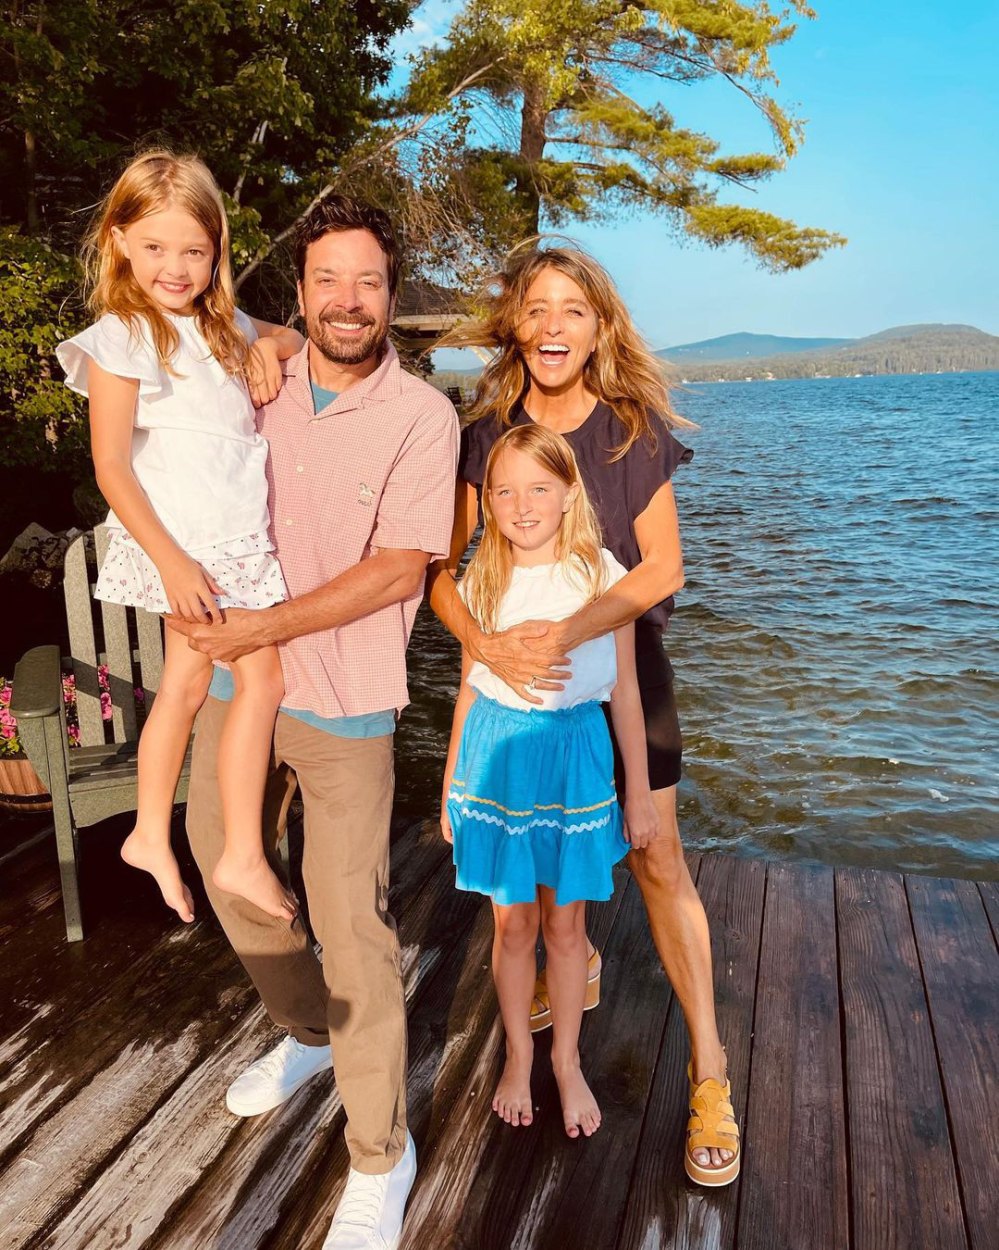 Jimmy Fallon Shares Rare Photo of Wife Nancy Juvonen and Their 2 Daughters: 'Happy 2nd of July'